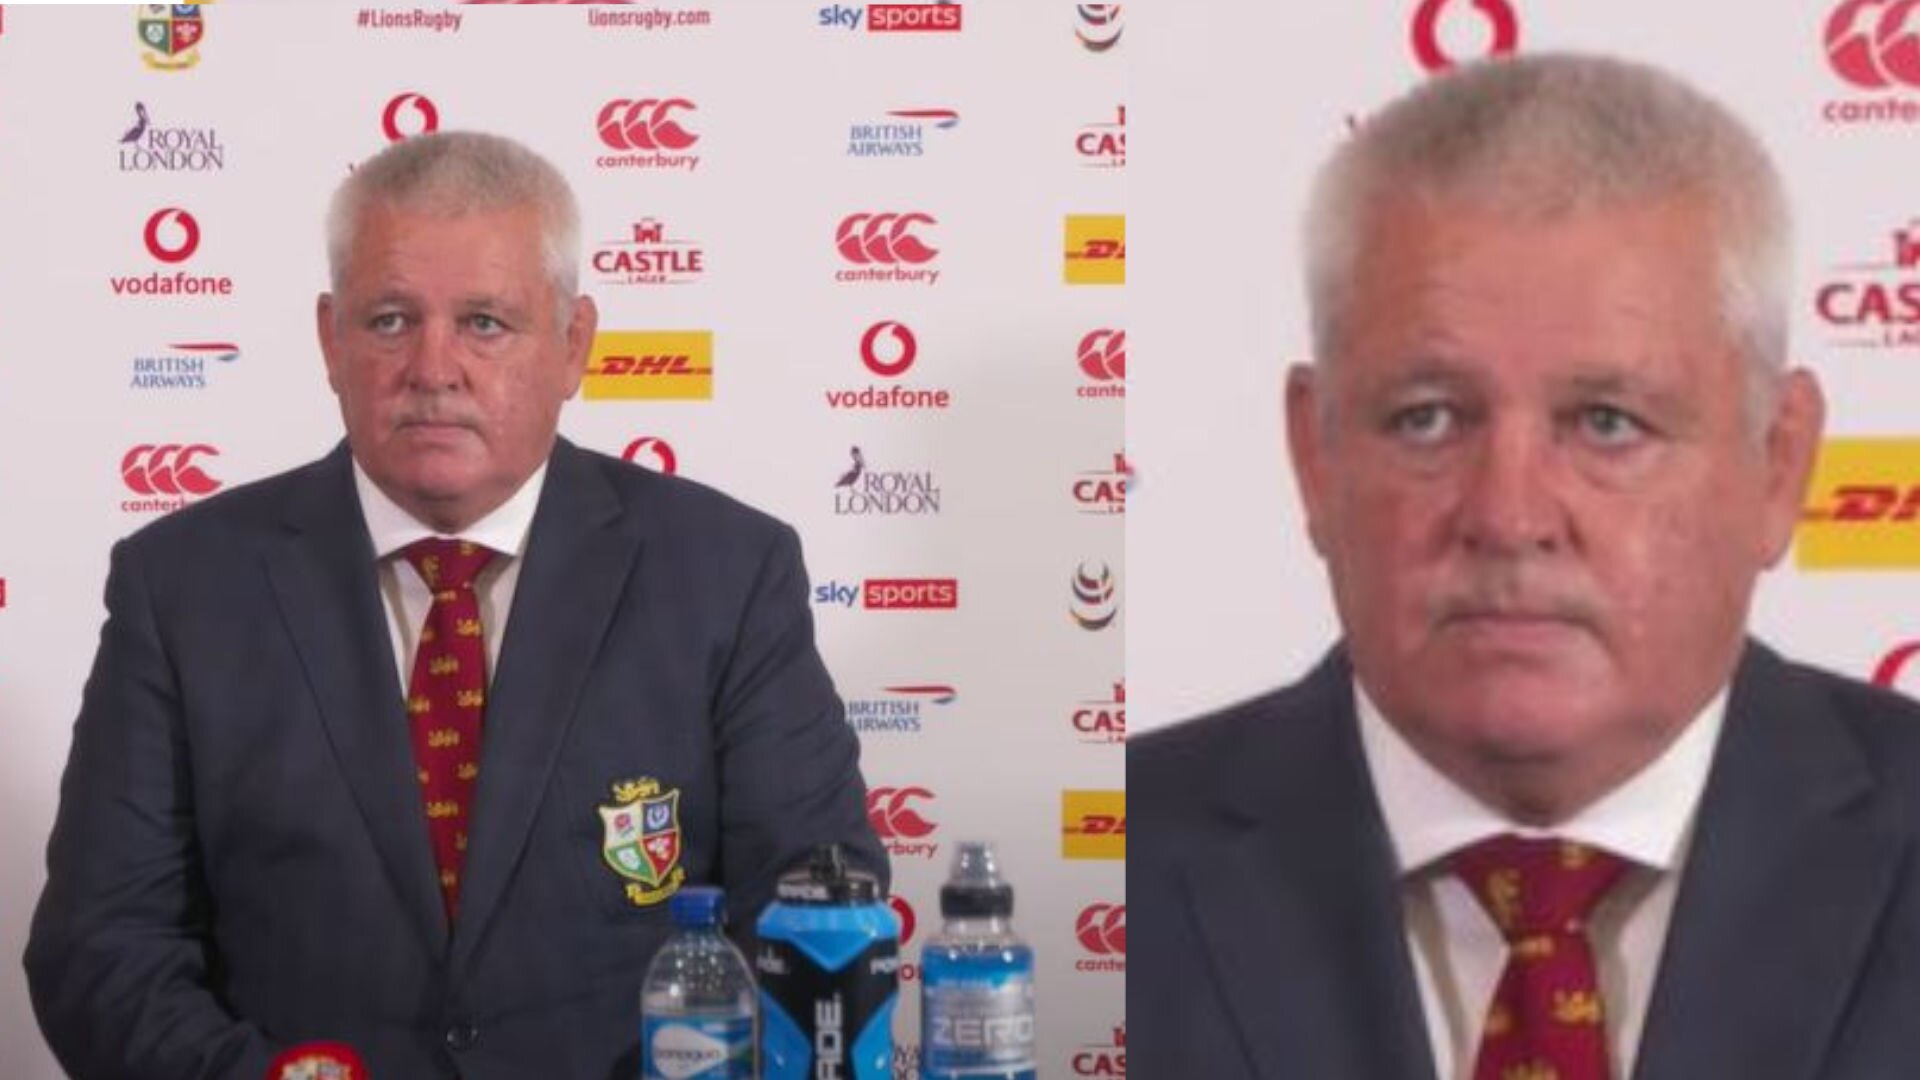 South African pundits shamelessly decide to launch at Gatland months after Lions tour